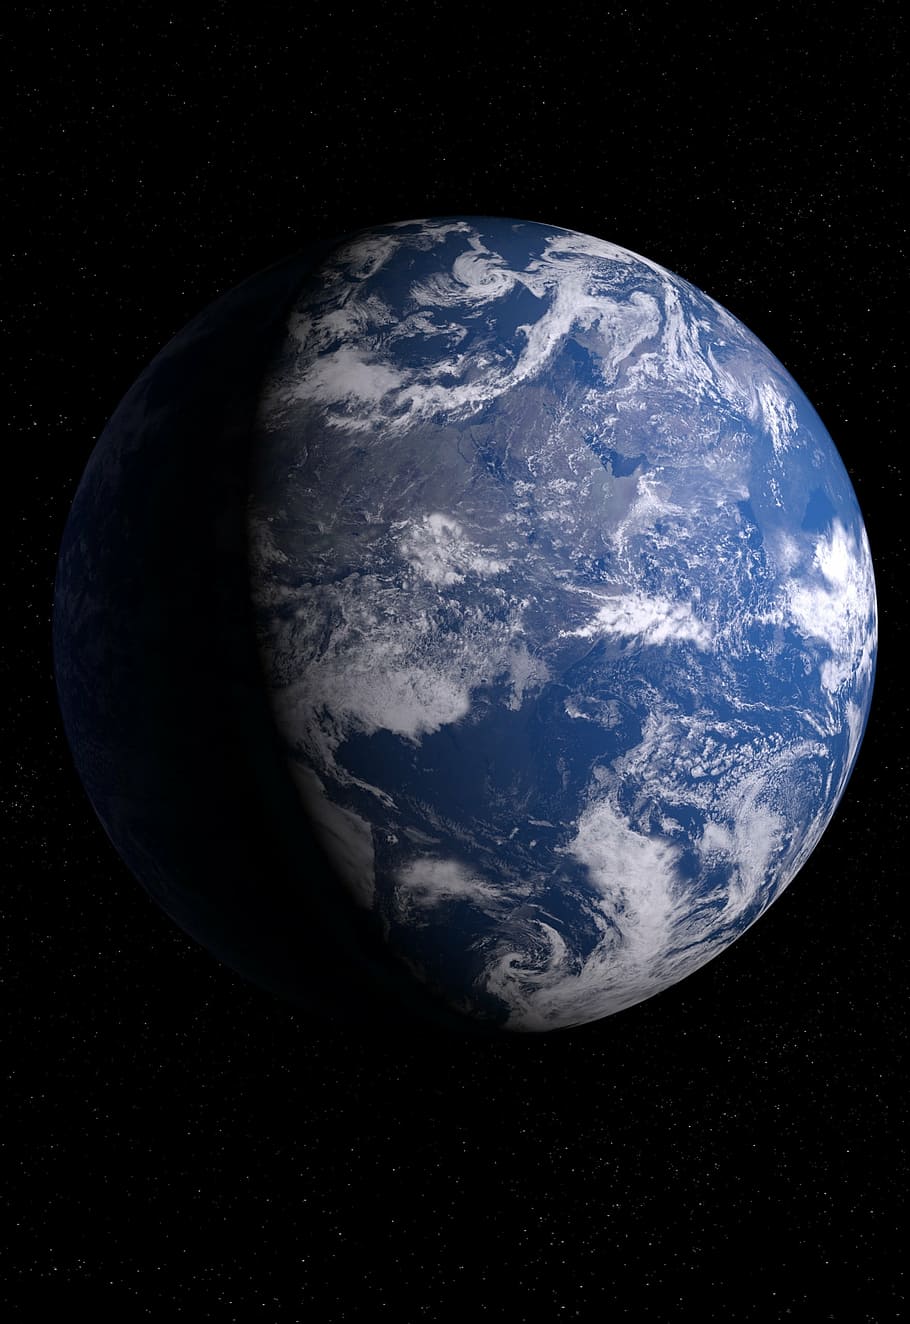 earth wallpaper, earth, globe, world, space, background, blue planet, planet, blue, ball